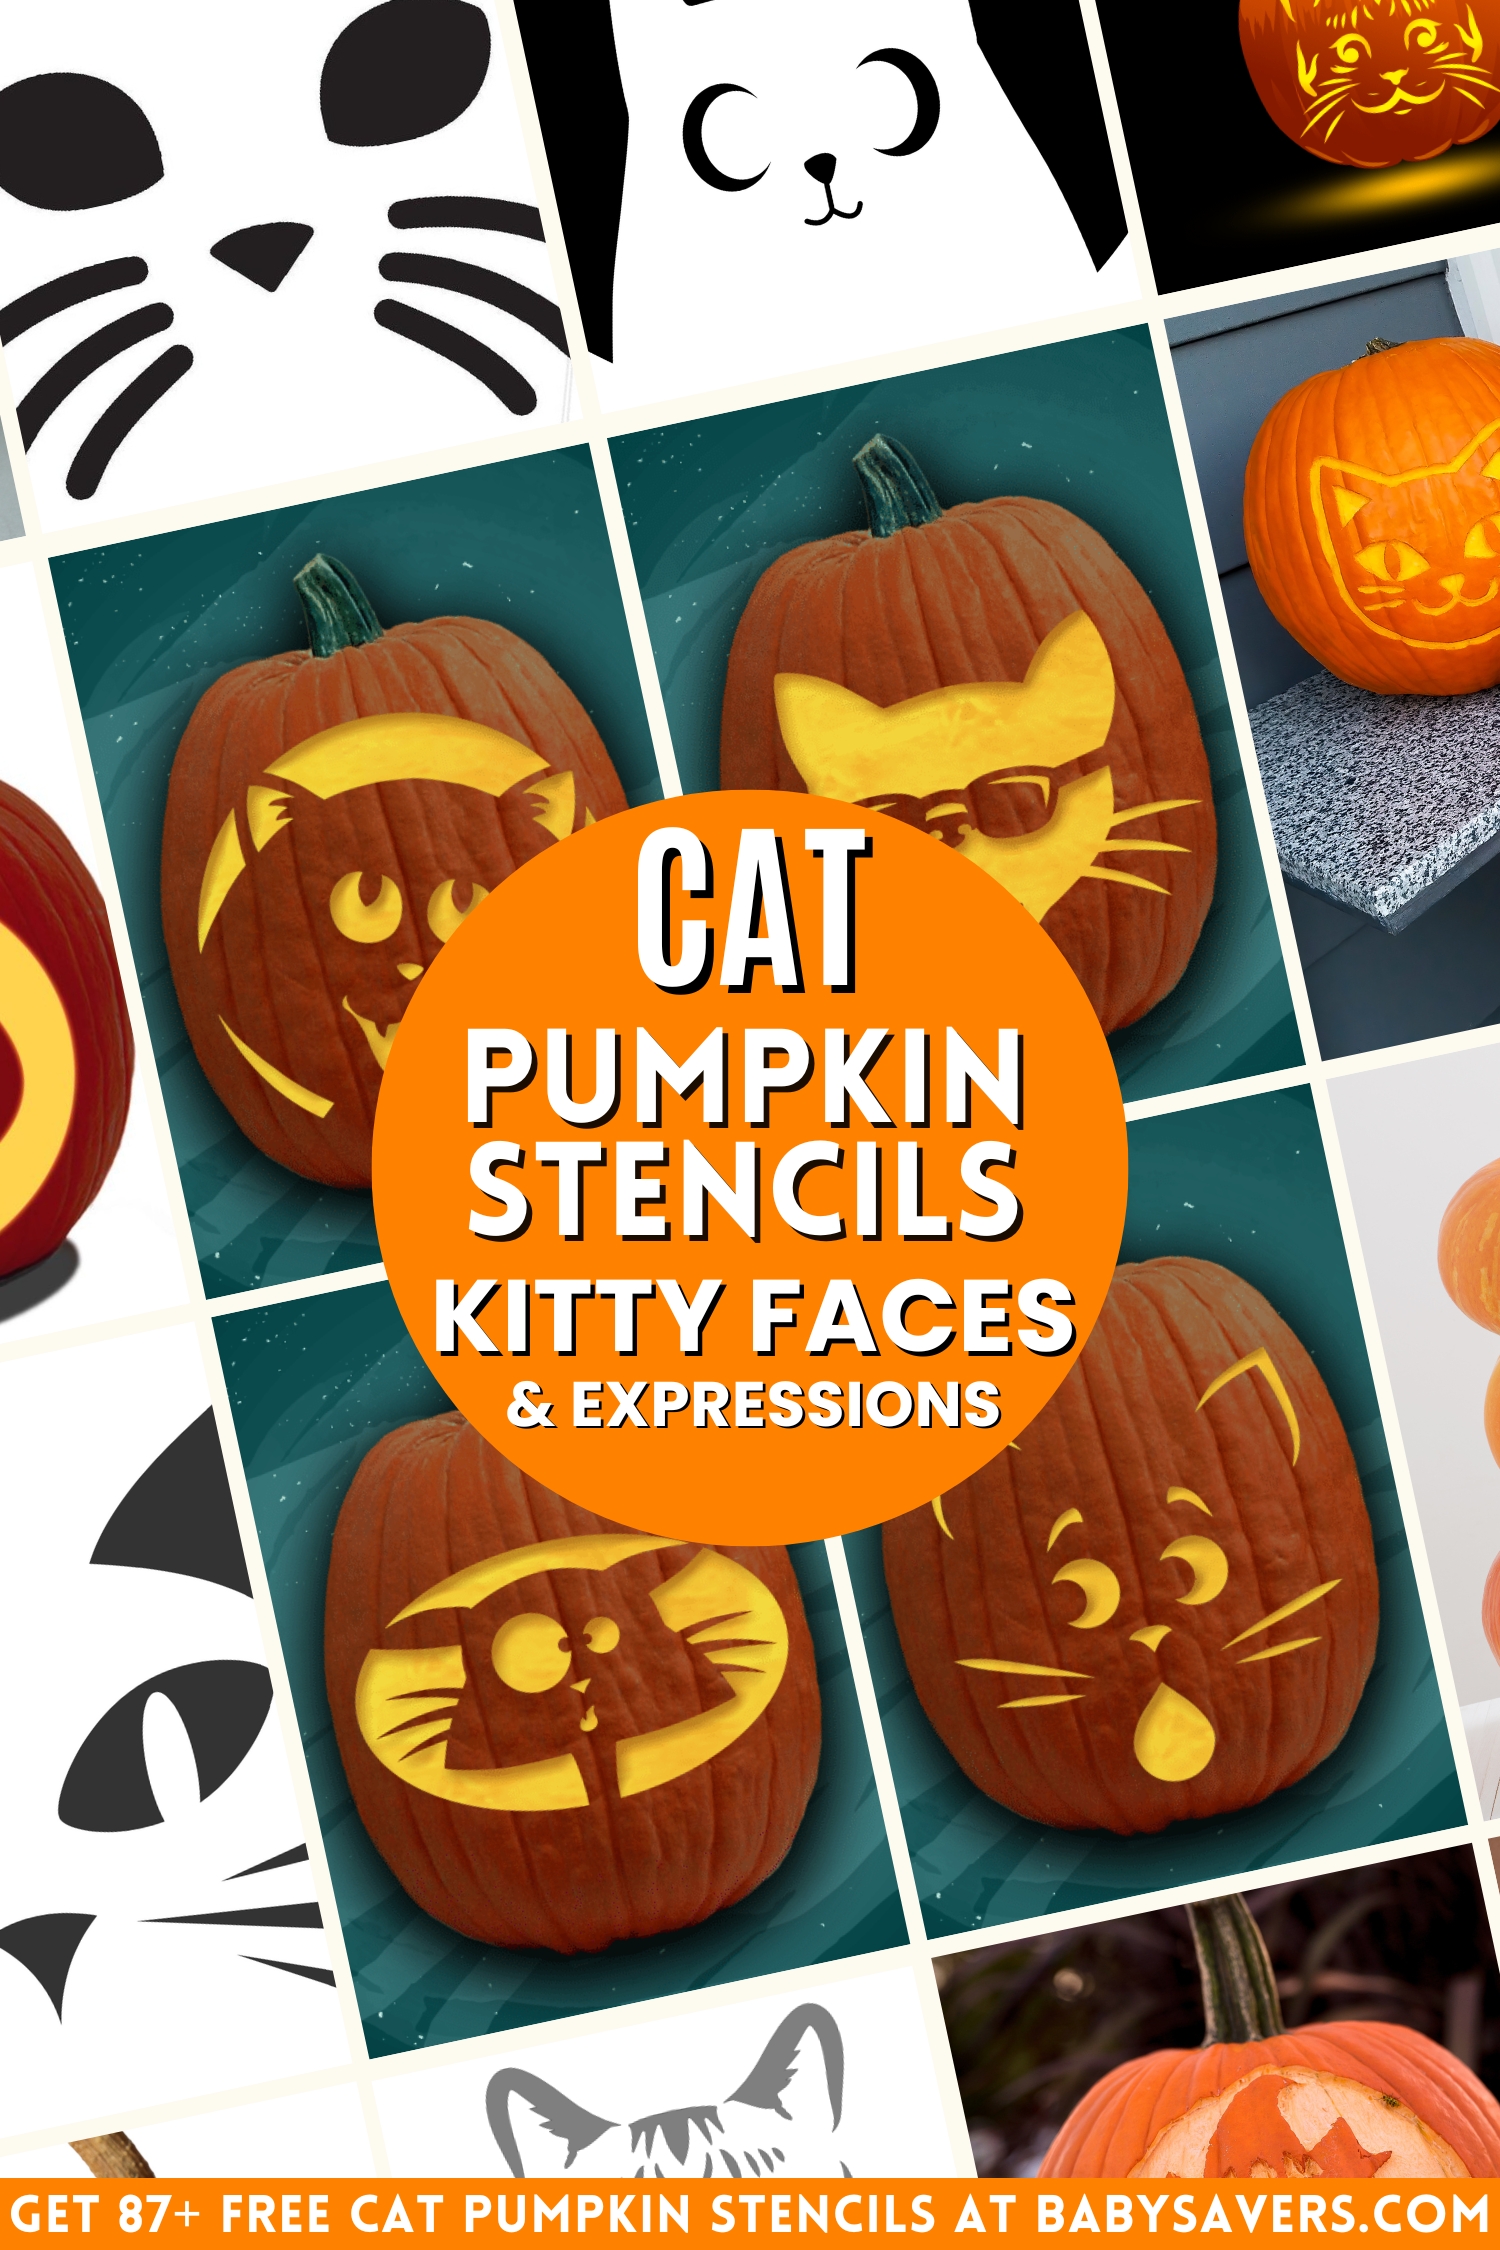 cat pumpkin stencils with just kitty faces